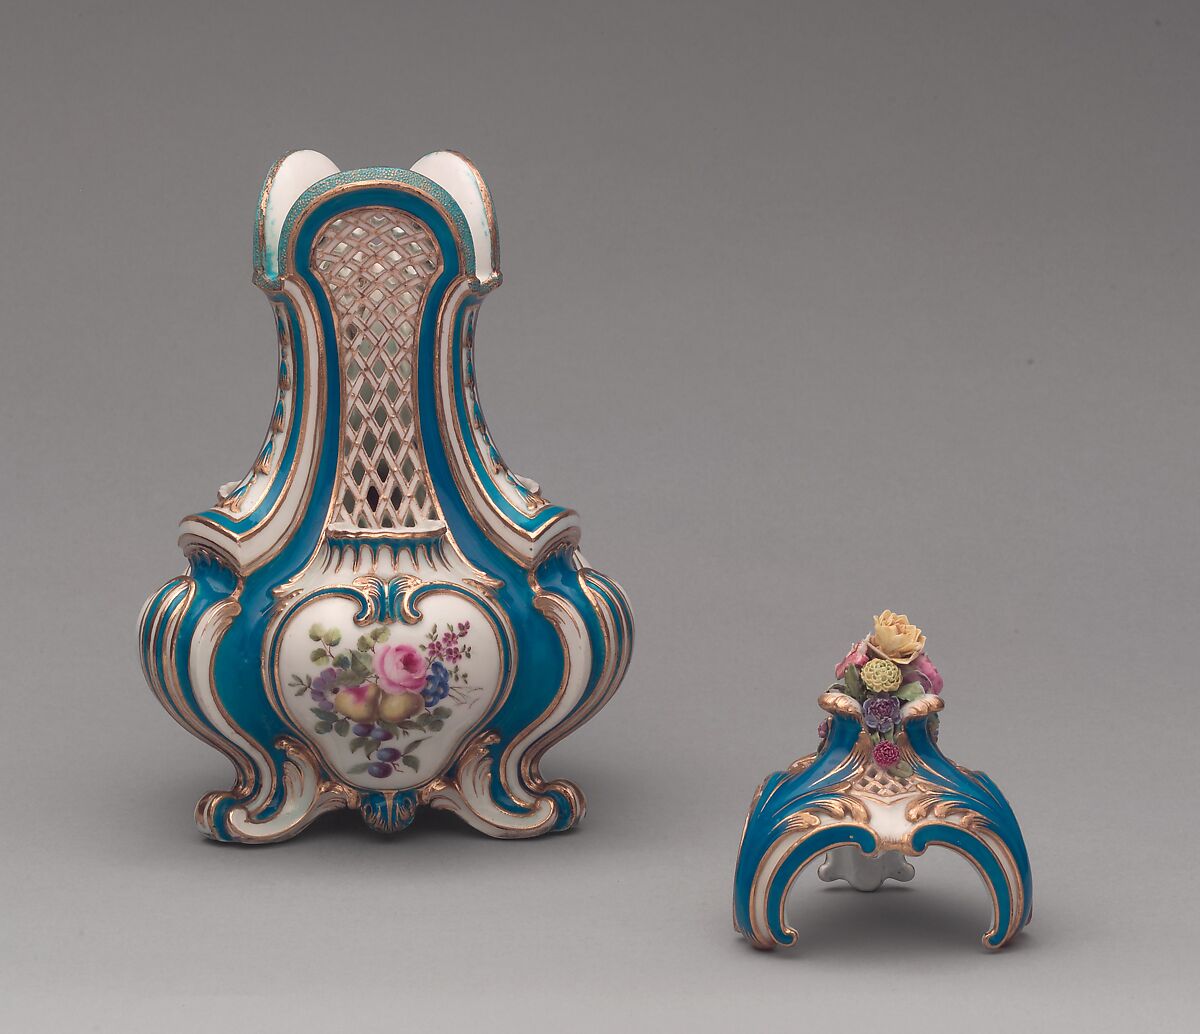 Vase with cover (vase pot-pourri triangle) (one of a pair), Sèvres Manufactory (French, 1740–present), Soft-paste porcelain, French, Sèvres 